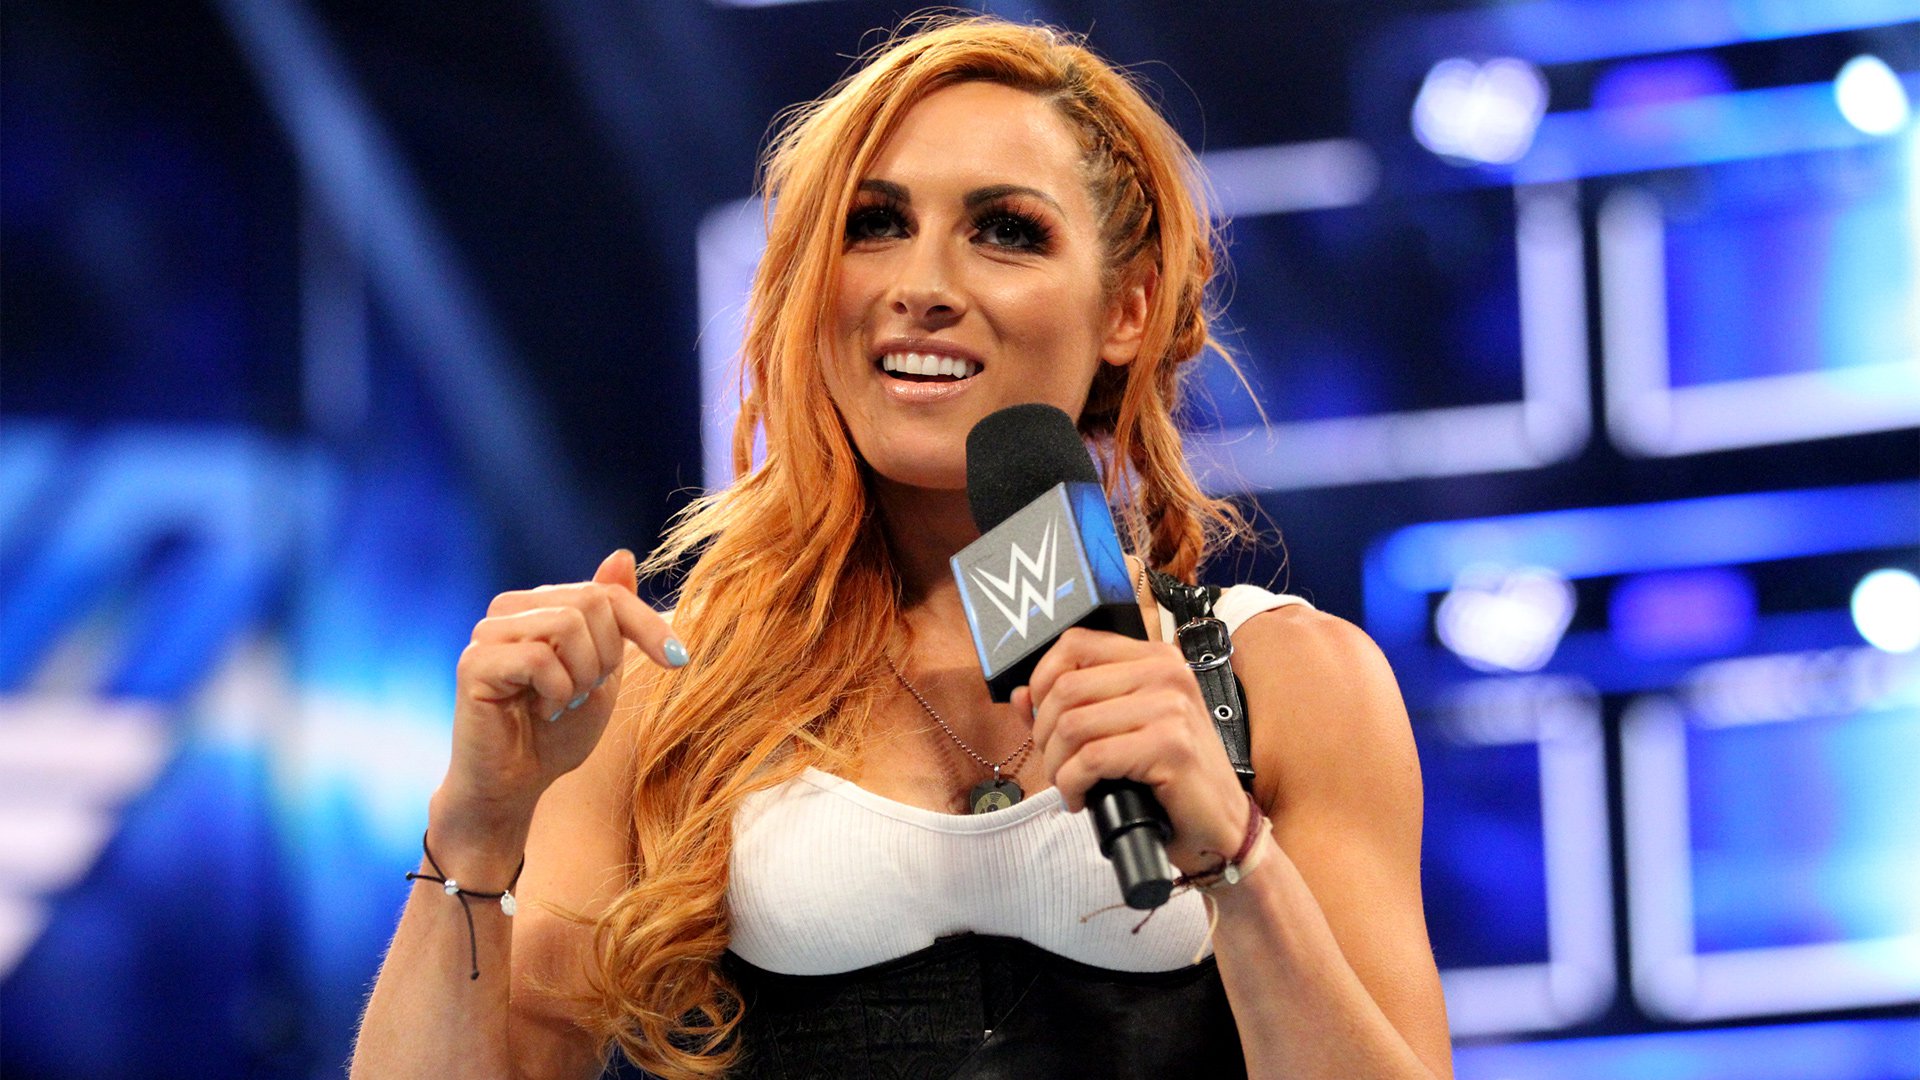 WWE Raw: 3 possible feuds for Becky Lynch if she returns to Red brand.